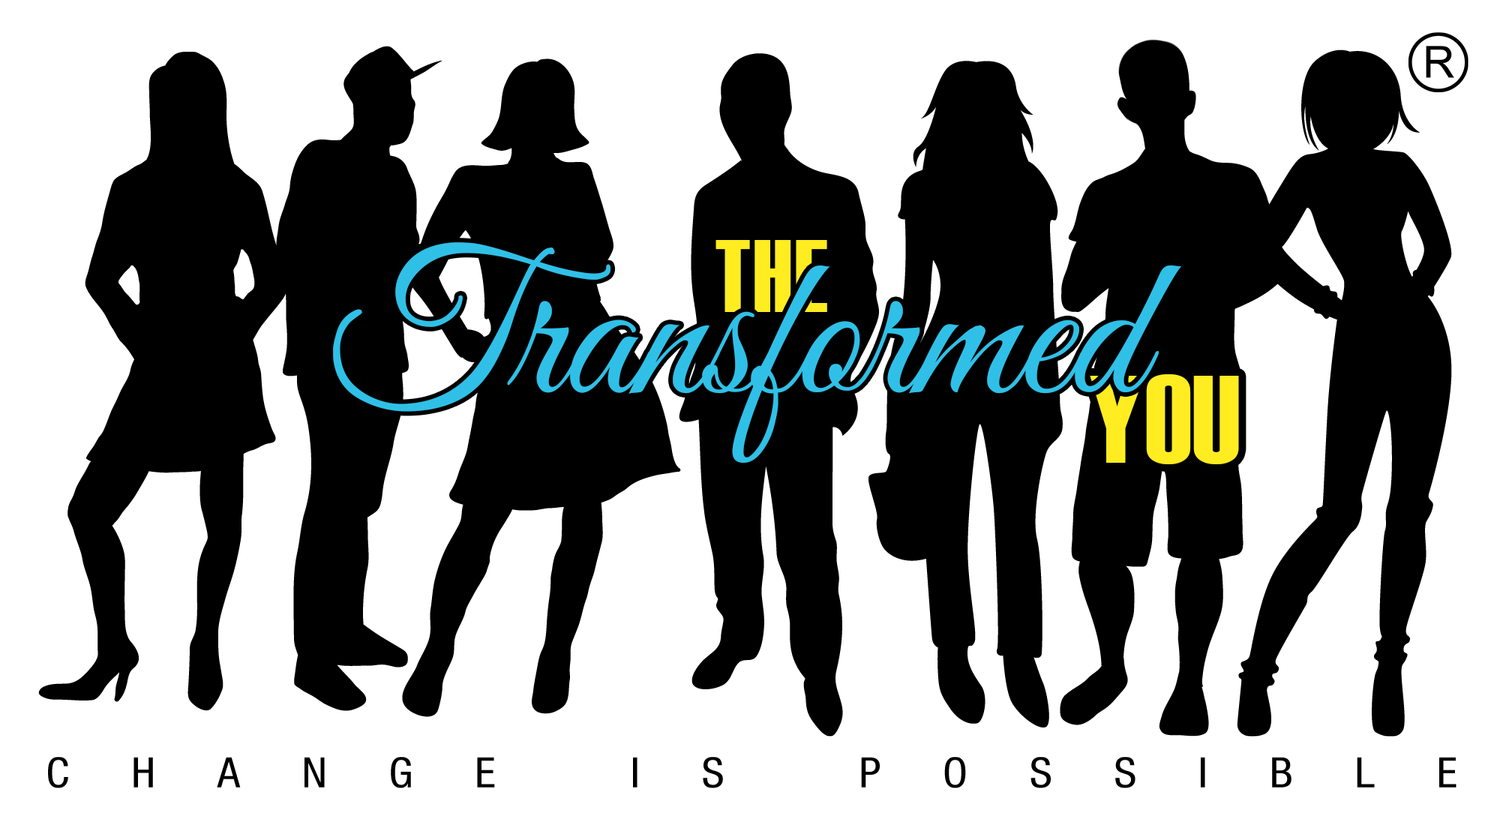 The Transformed You